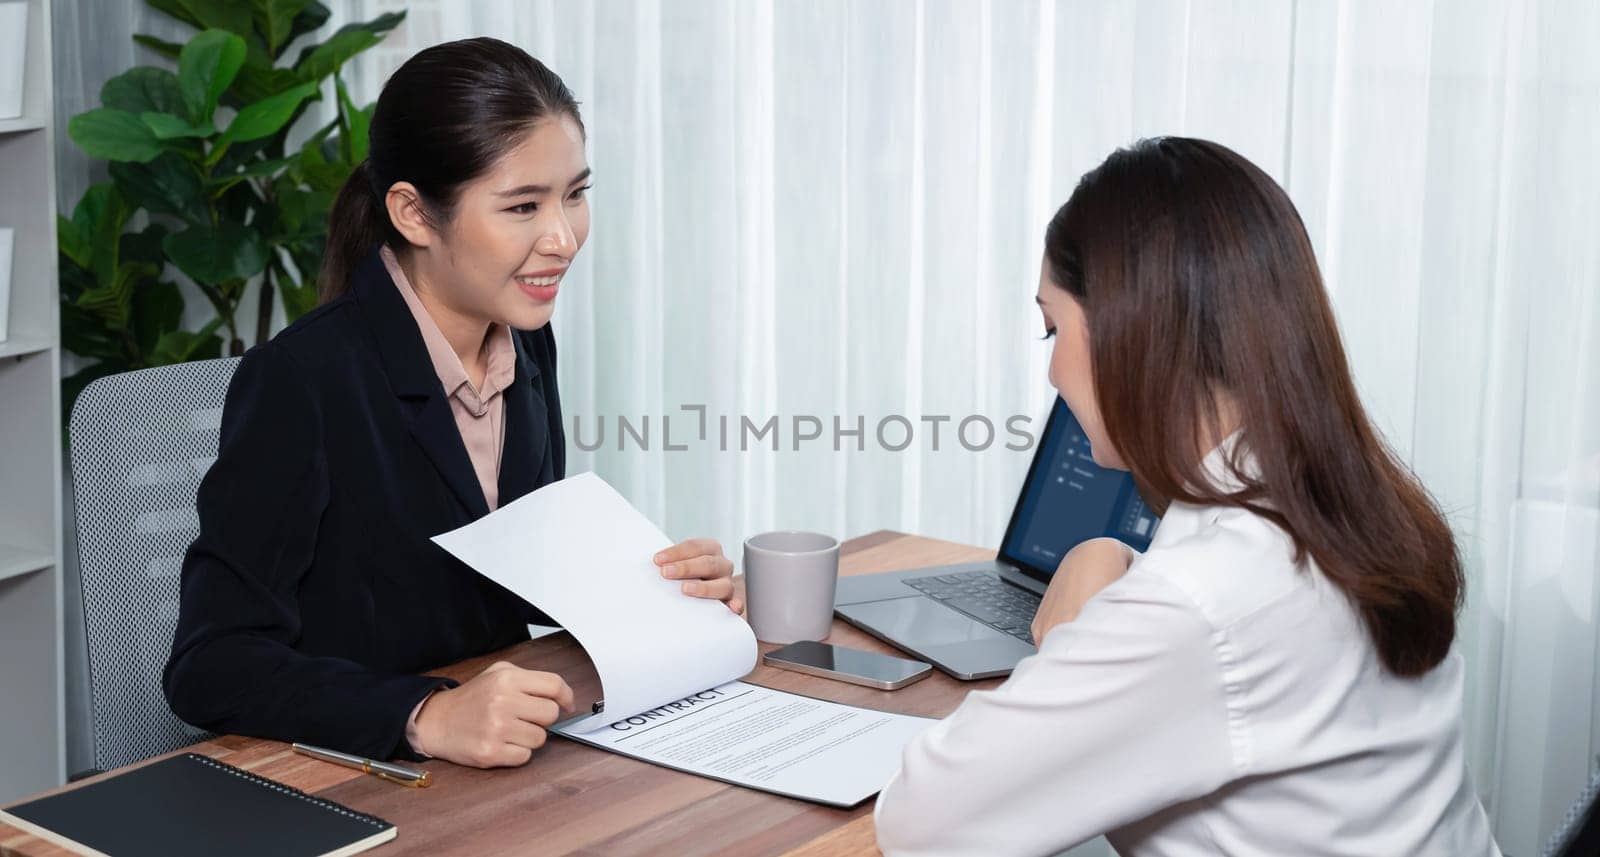 Business deal meeting, young businesswomen carefully reviewing terms and condition of contract agreement papers in office. Corporate lawyer give consultation on contract deal. Enthusiastic